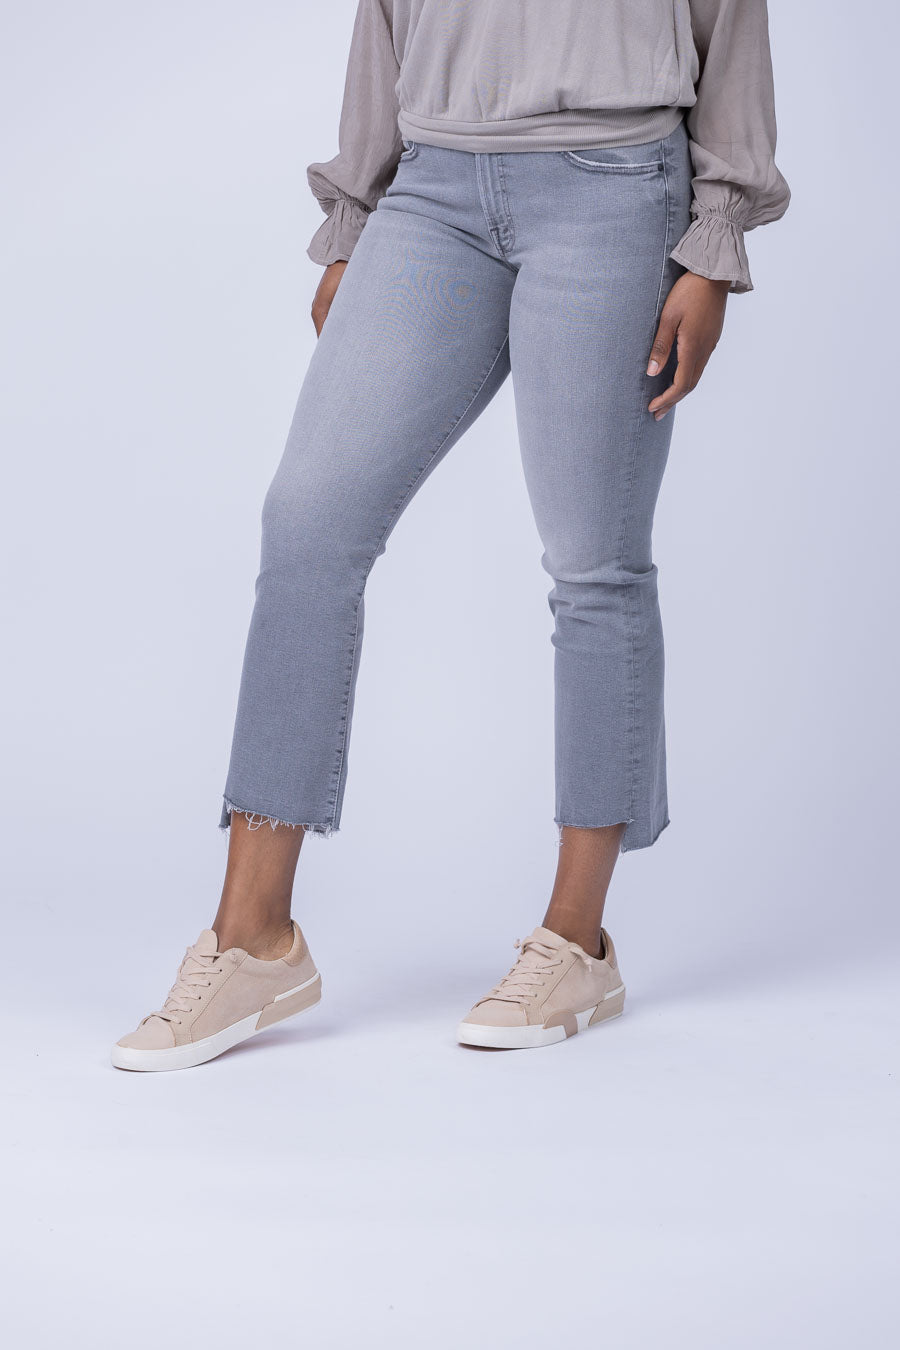 Mother Denim The Insider Crop in Barely There – CoatTails